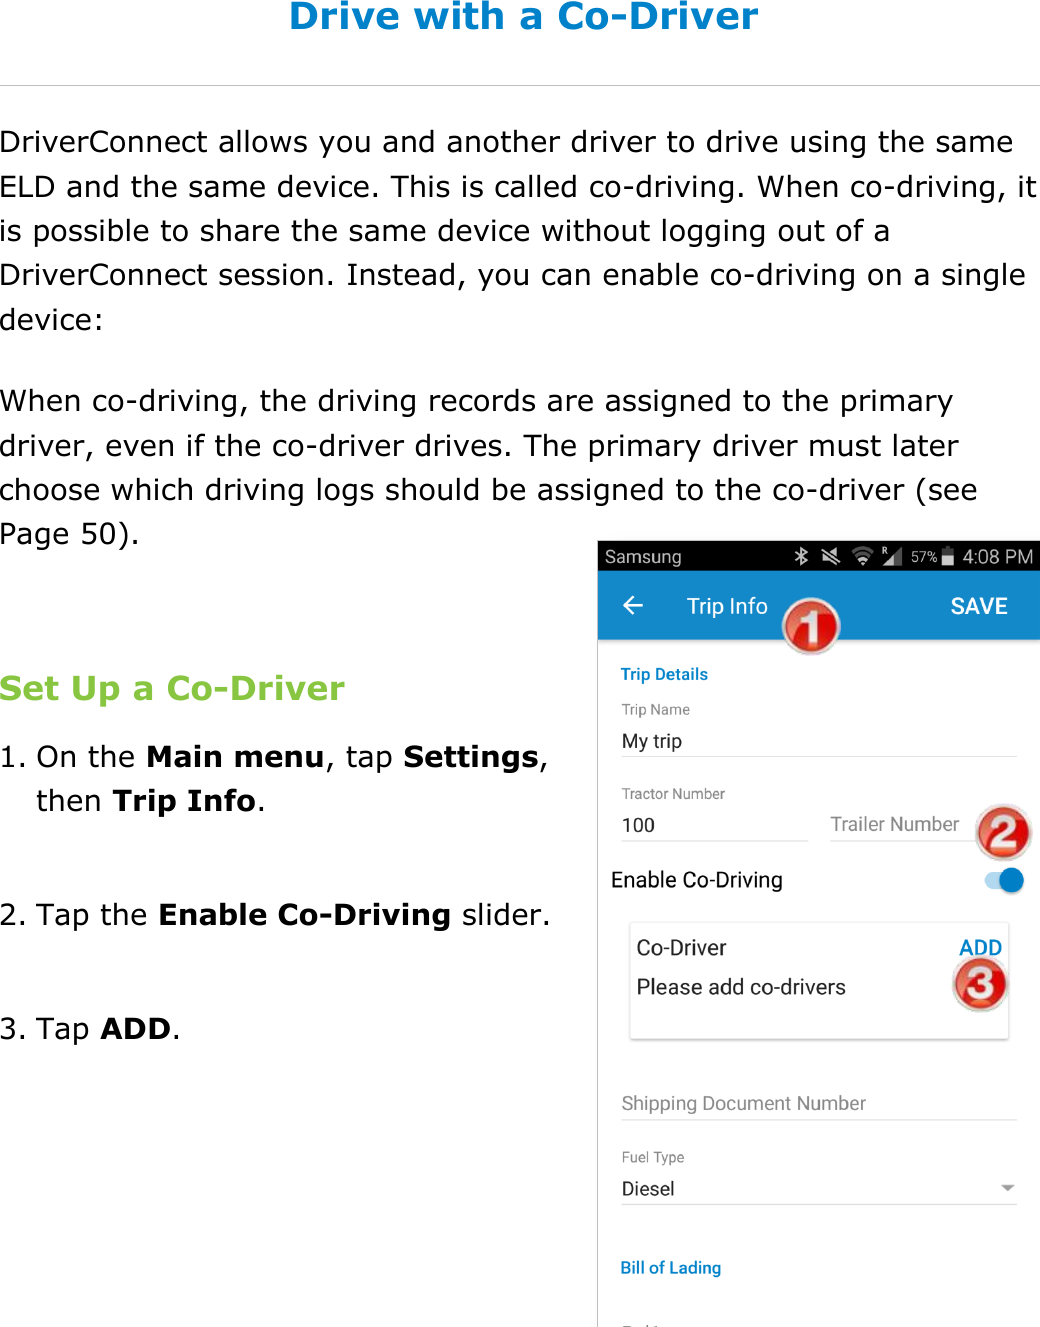 Manage Fuel Purchases DriverConnect User Guide  48 © 2017, Rand McNally, Inc. Drive with a Co-Driver DriverConnect allows you and another driver to drive using the same ELD and the same device. This is called co-driving. When co-driving, it is possible to share the same device without logging out of a DriverConnect session. Instead, you can enable co-driving on a single device: When co-driving, the driving records are assigned to the primary driver, even if the co-driver drives. The primary driver must later choose which driving logs should be assigned to the co-driver (see Page 50).  Set Up a Co-Driver 1. On the Main menu, tap Settings, then Trip Info.  2. Tap the Enable Co-Driving slider.  3. Tap ADD.   